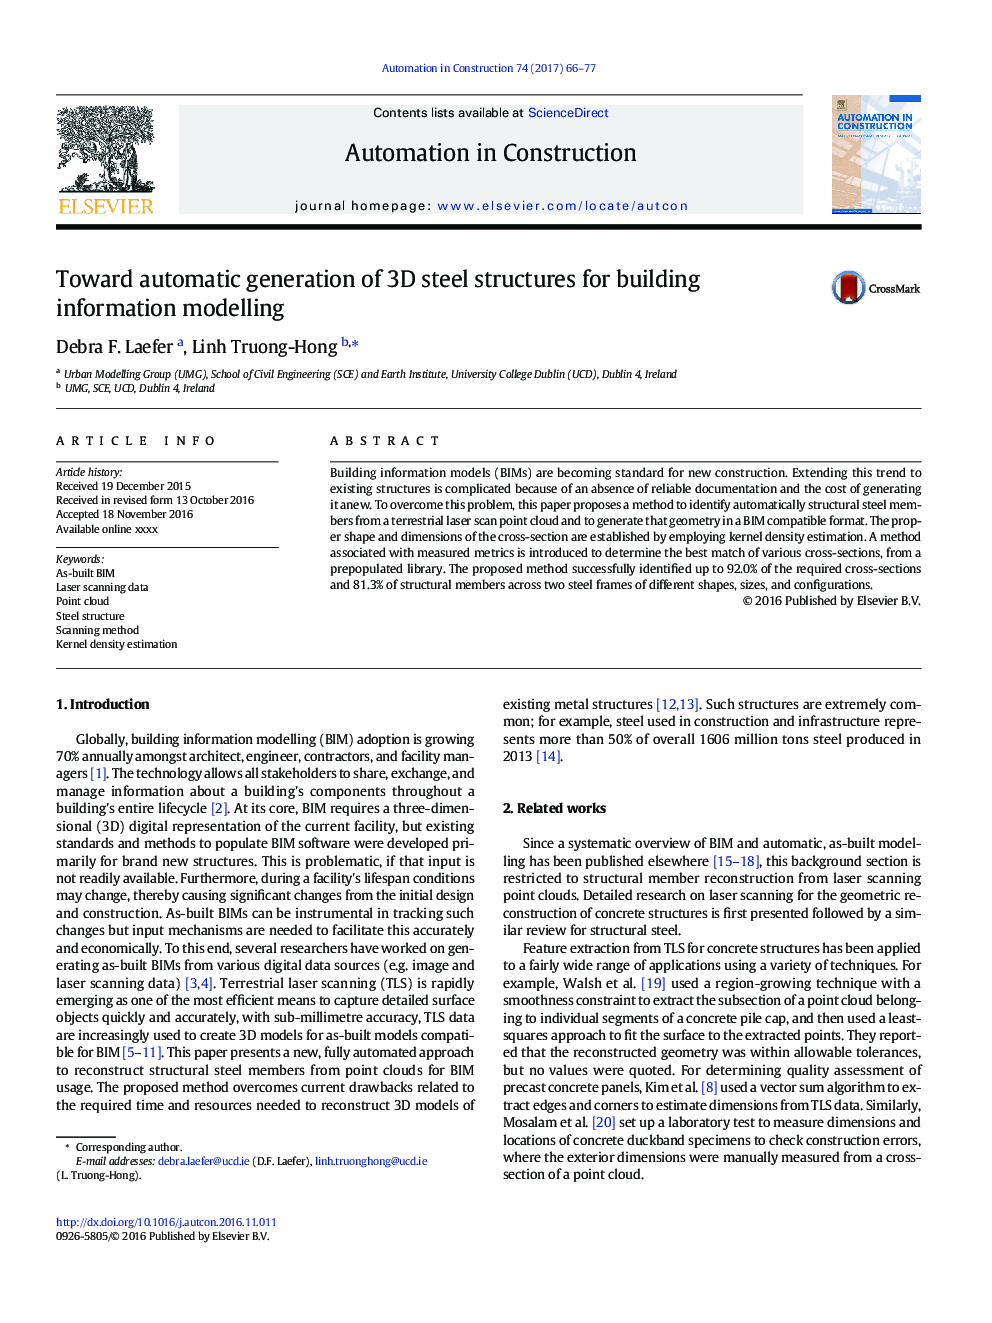 Toward automatic generation of 3D steel structures for building information modelling